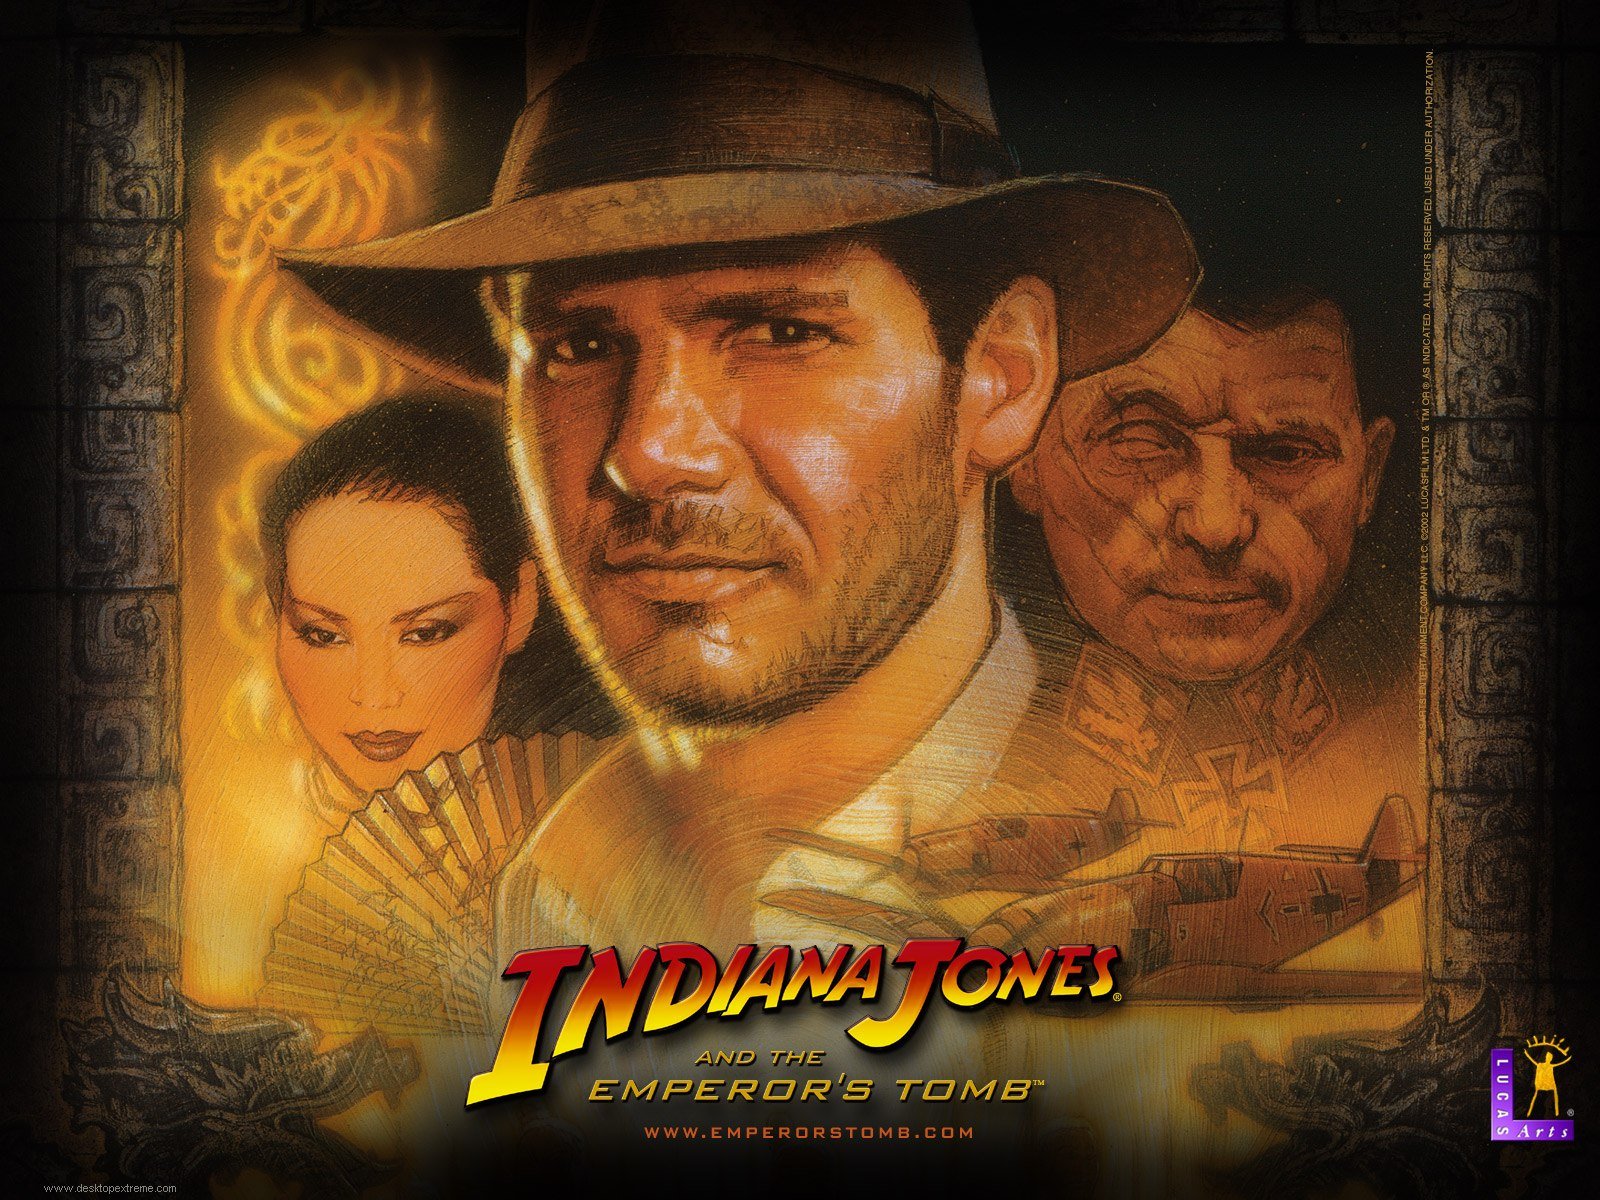 Indiana Jones Wallpaper by DesktopExtremecom   Wallpaper For Your